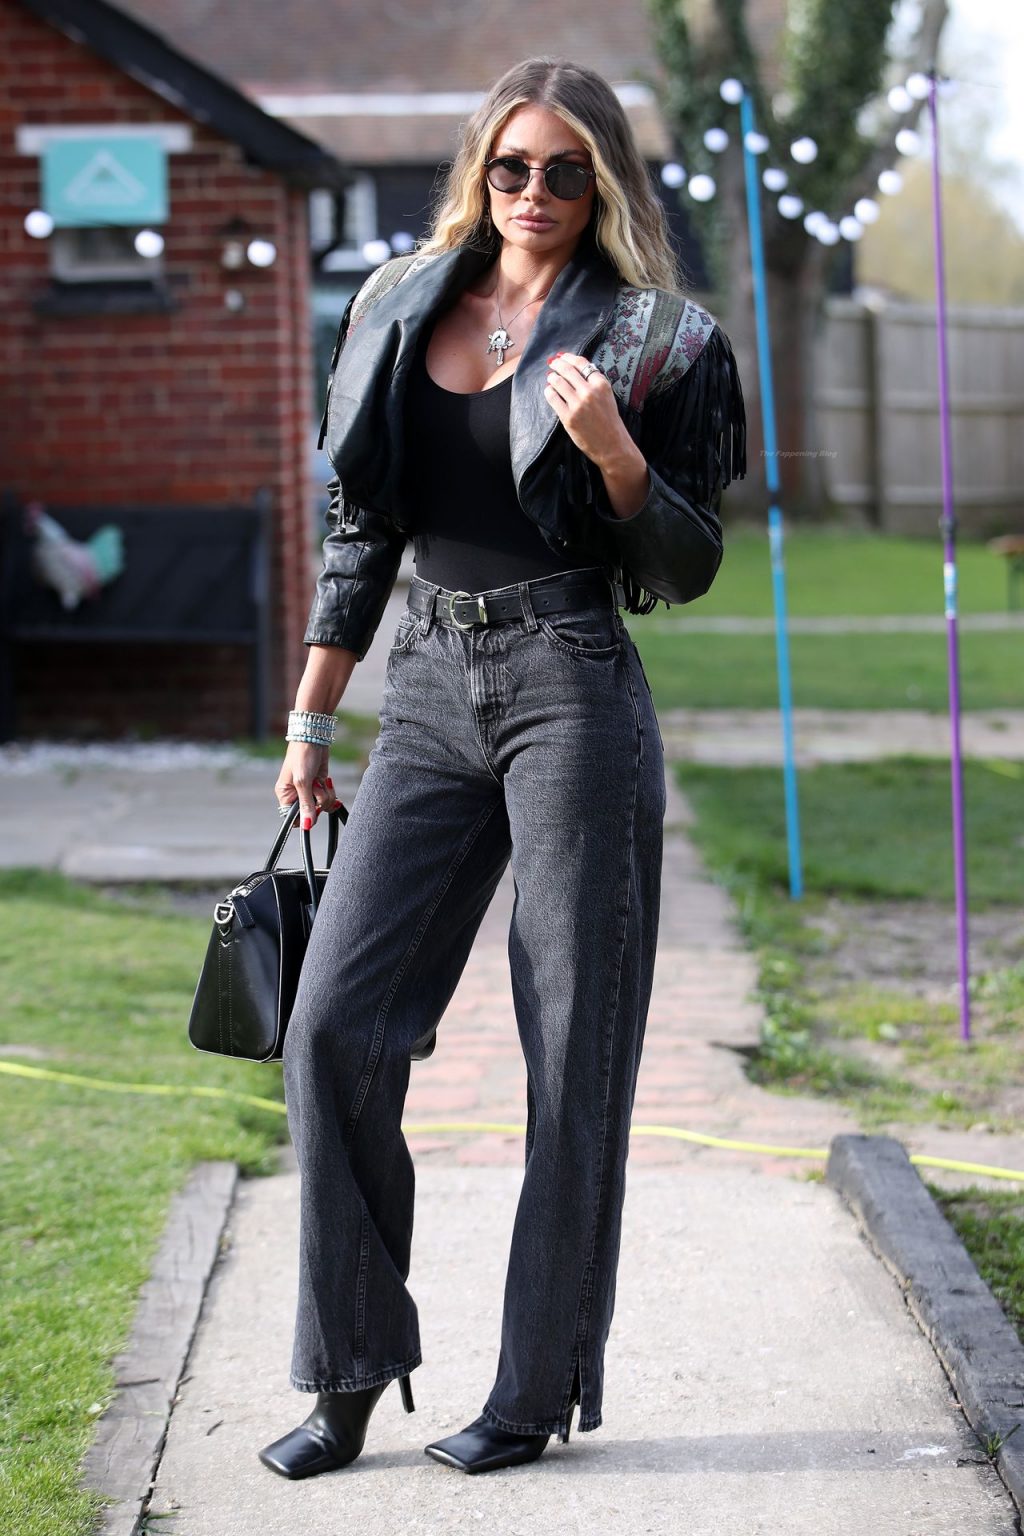 Busty Chloe Sims is Seen at the TOWIE Show Filming in Essex (7 Photos)